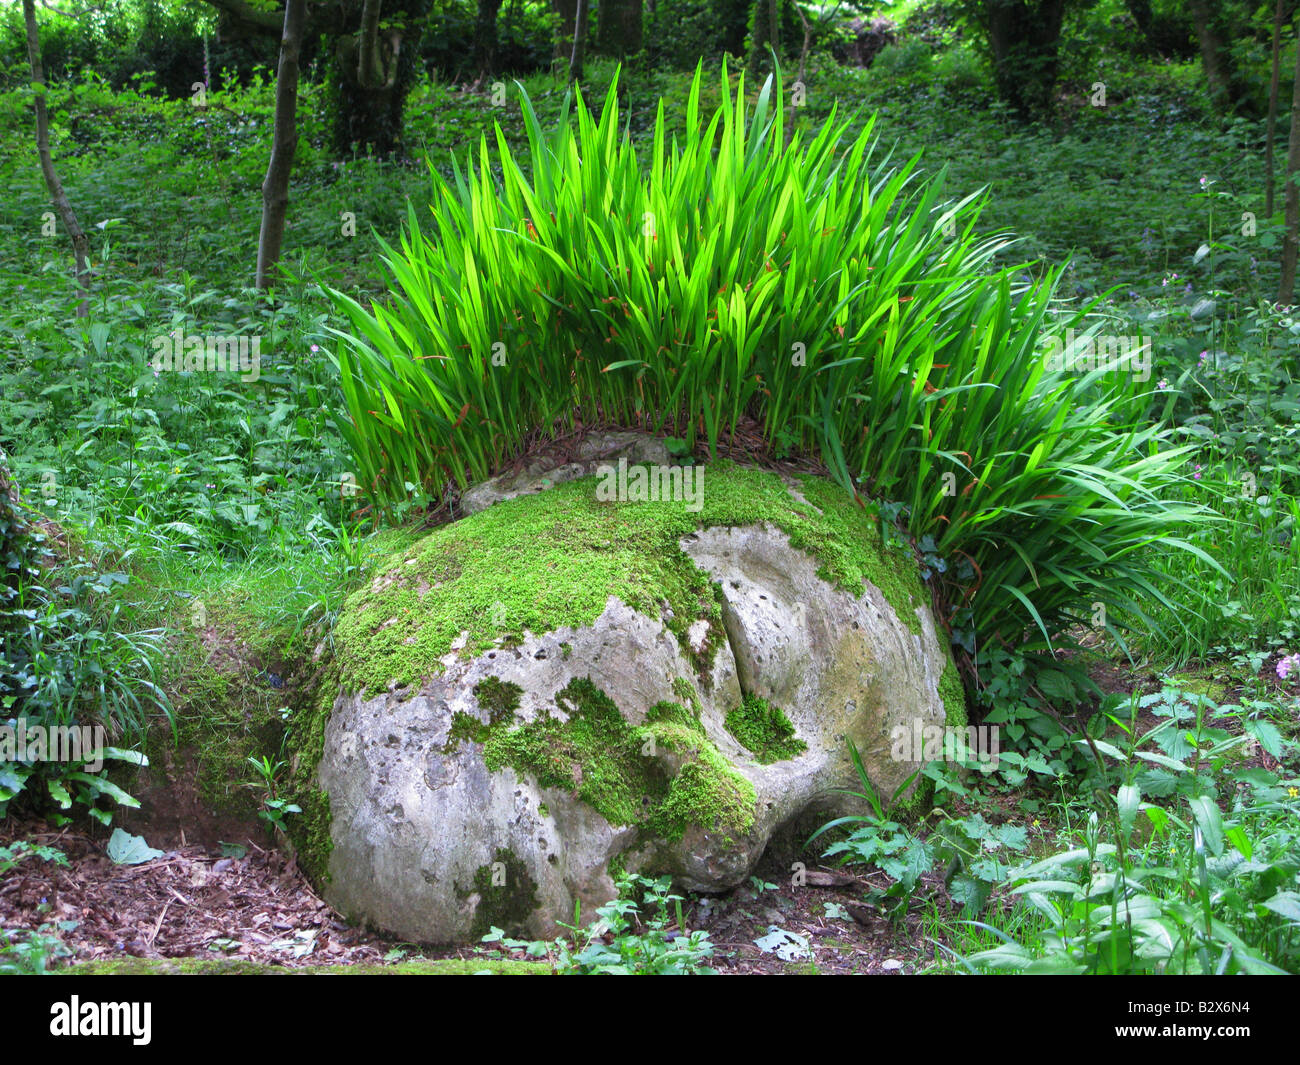 Lost Gardens of Heligan, Green Head, garden, grass for hair, moss covered face, under the trees, Mevagissey, Cornwall, Gardenesque style, design style Stock Photo